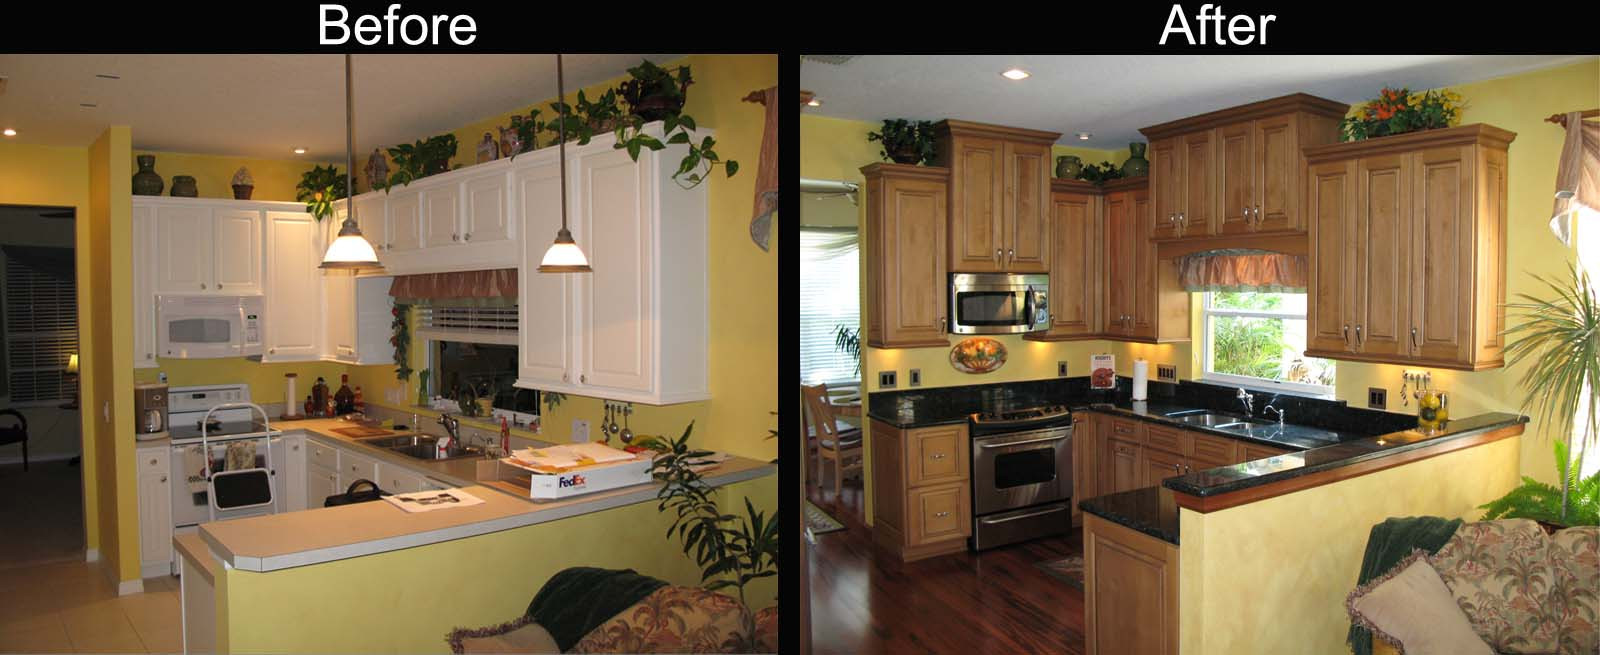 Kitchen Remodels Before And After
 Kitchen Decor Kitchen Remodel Before And After